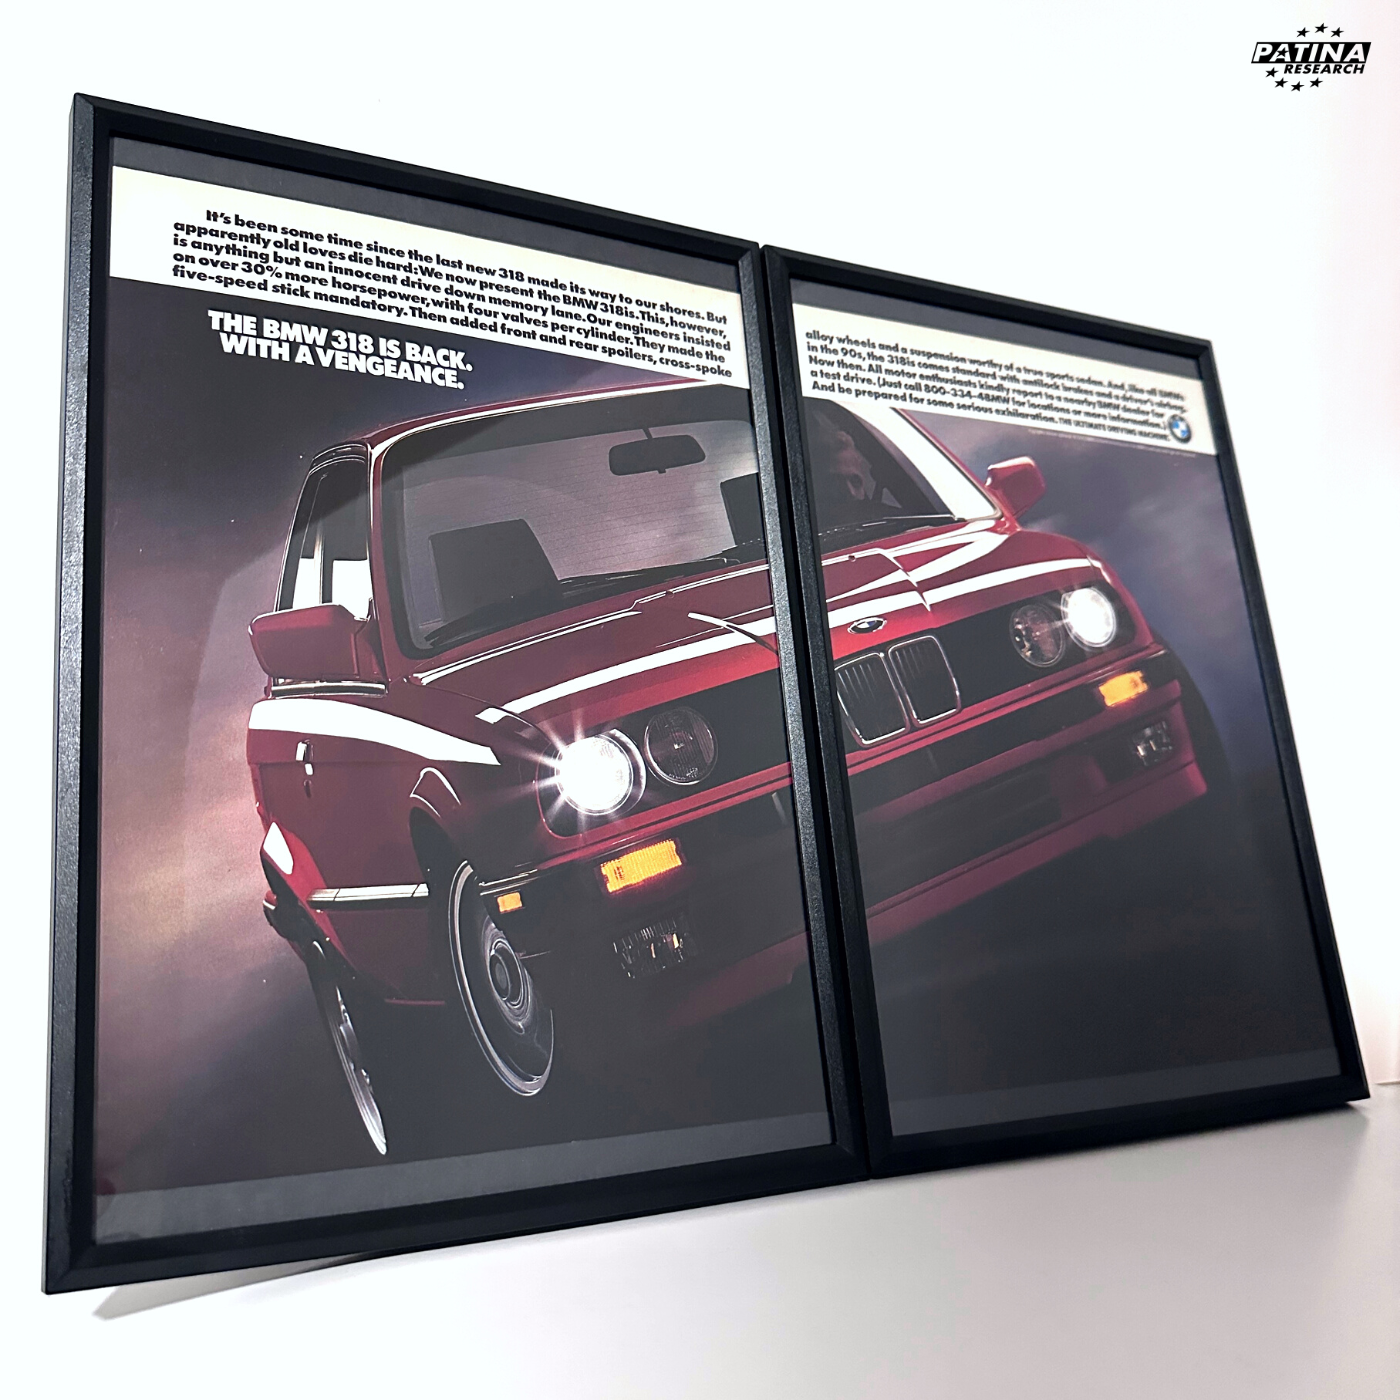 BMW 318 is back. With a vengeance framed ad